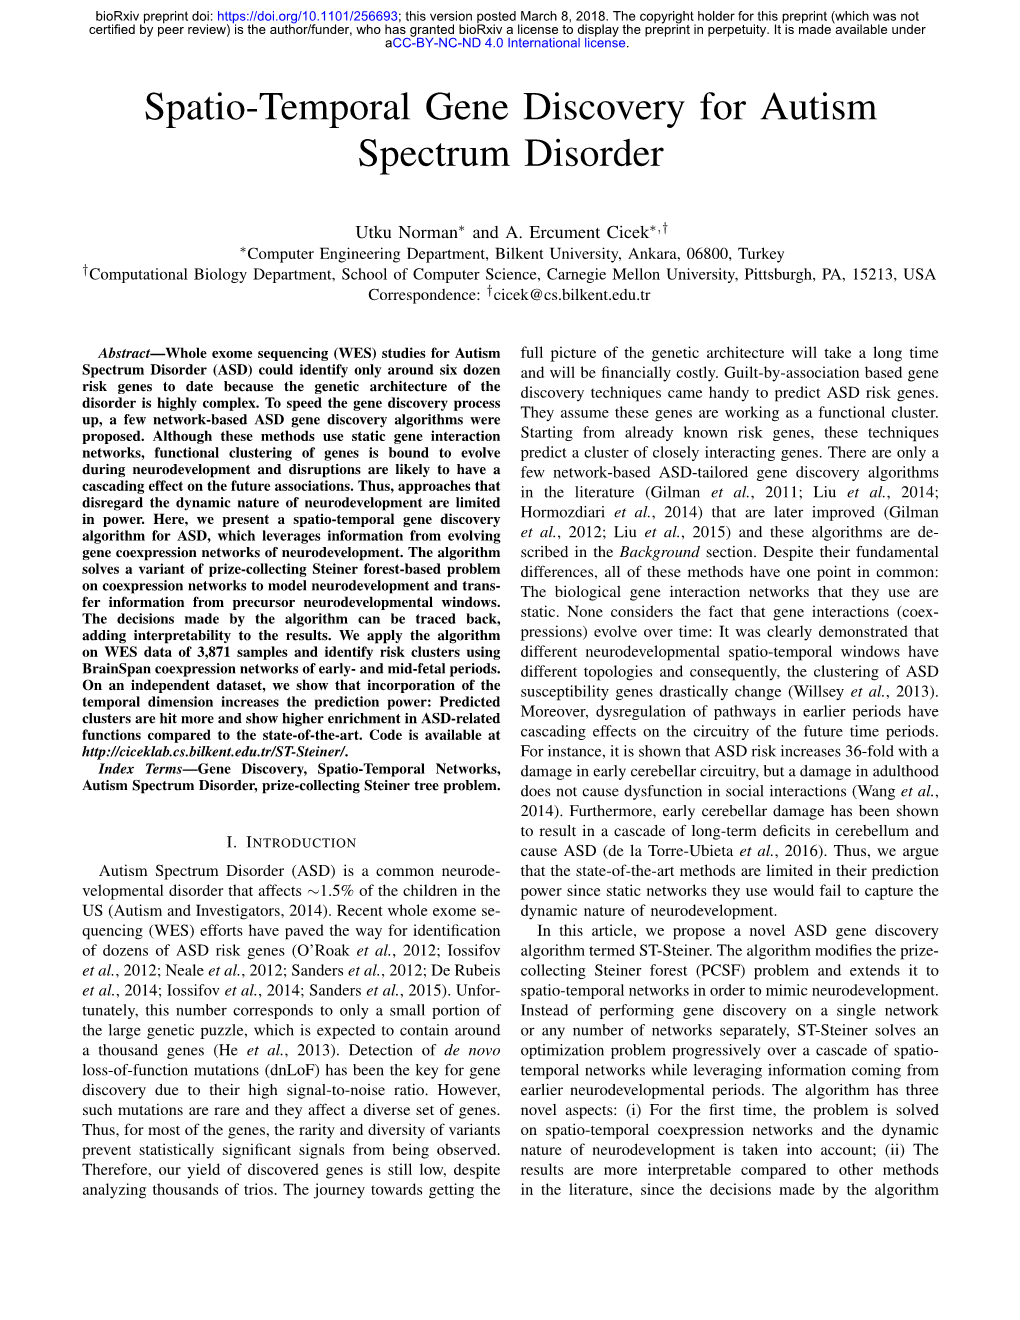 Spatio-Temporal Gene Discovery for Autism Spectrum Disorder